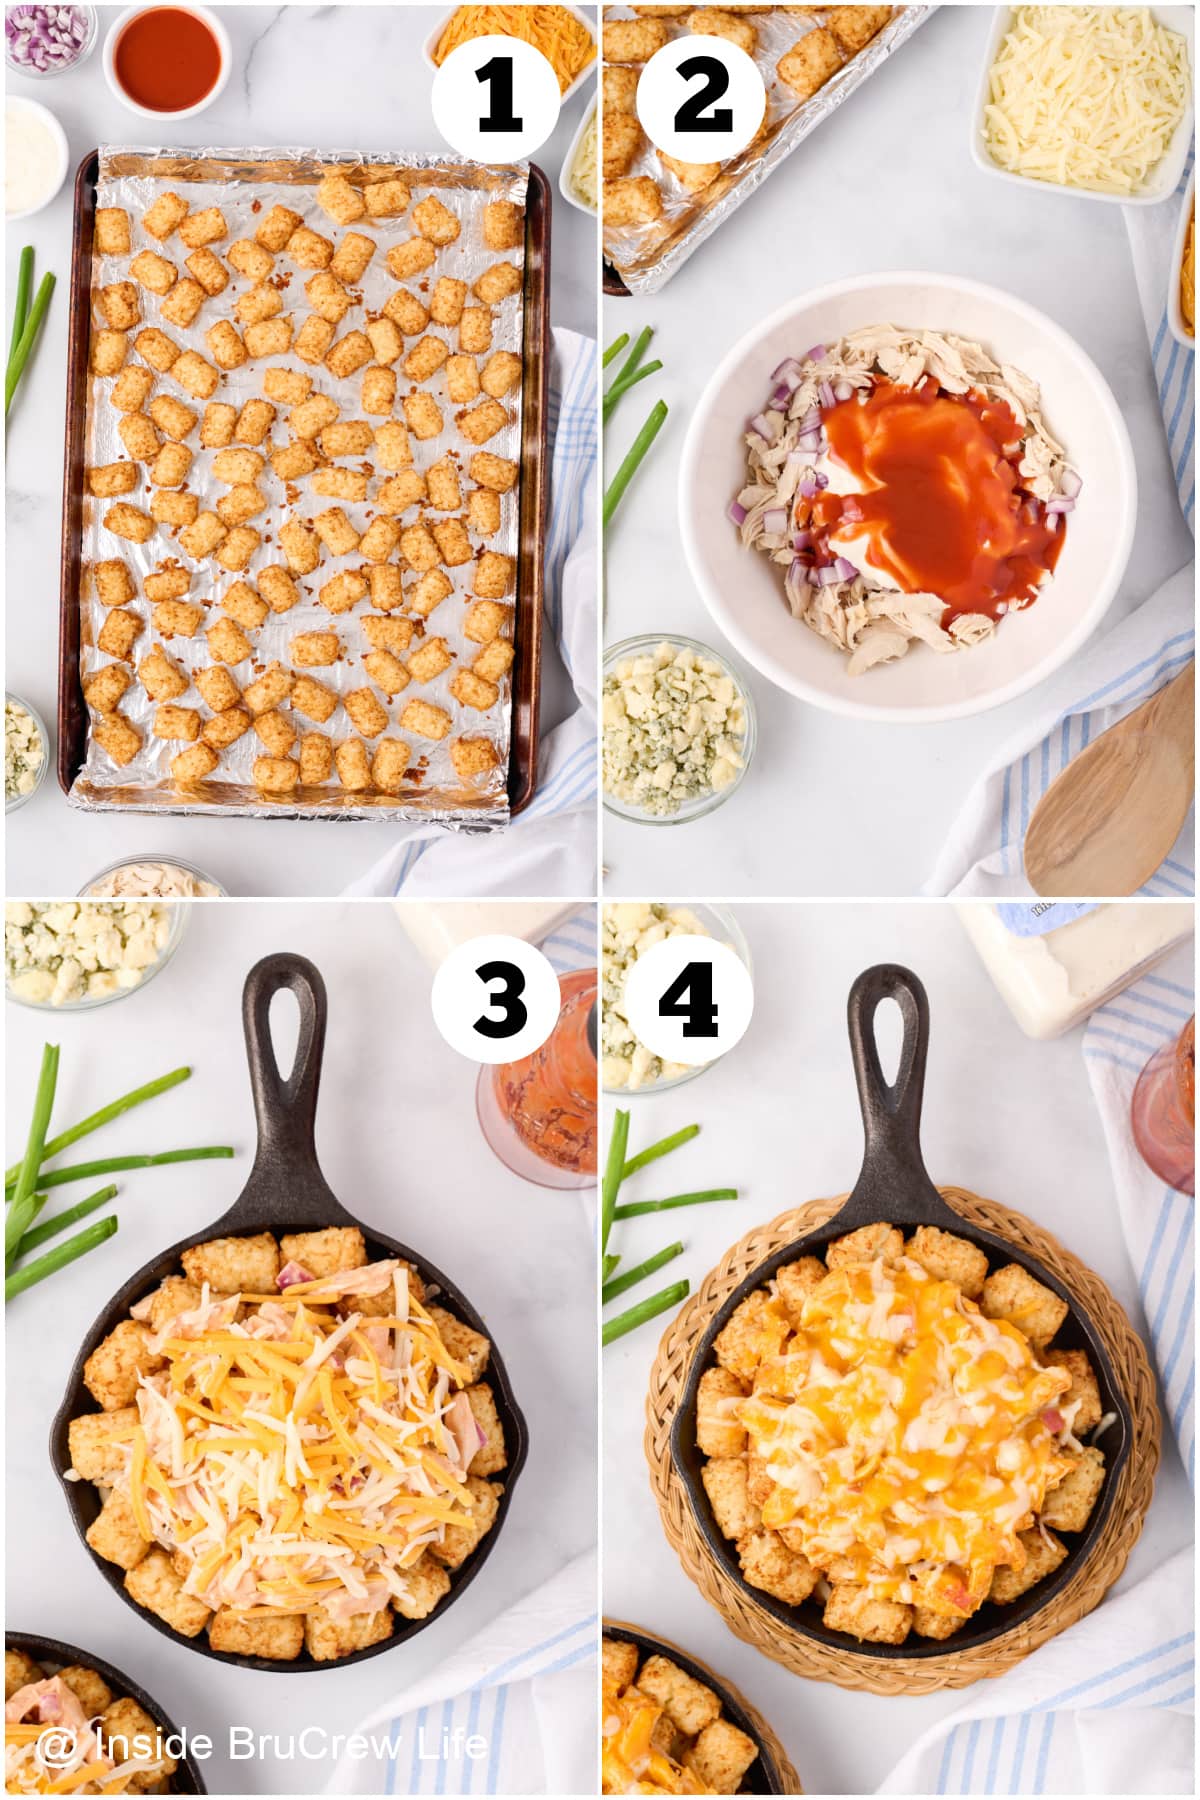 Four pictures collaged together showing how to assemble buffalo chicken totchos.